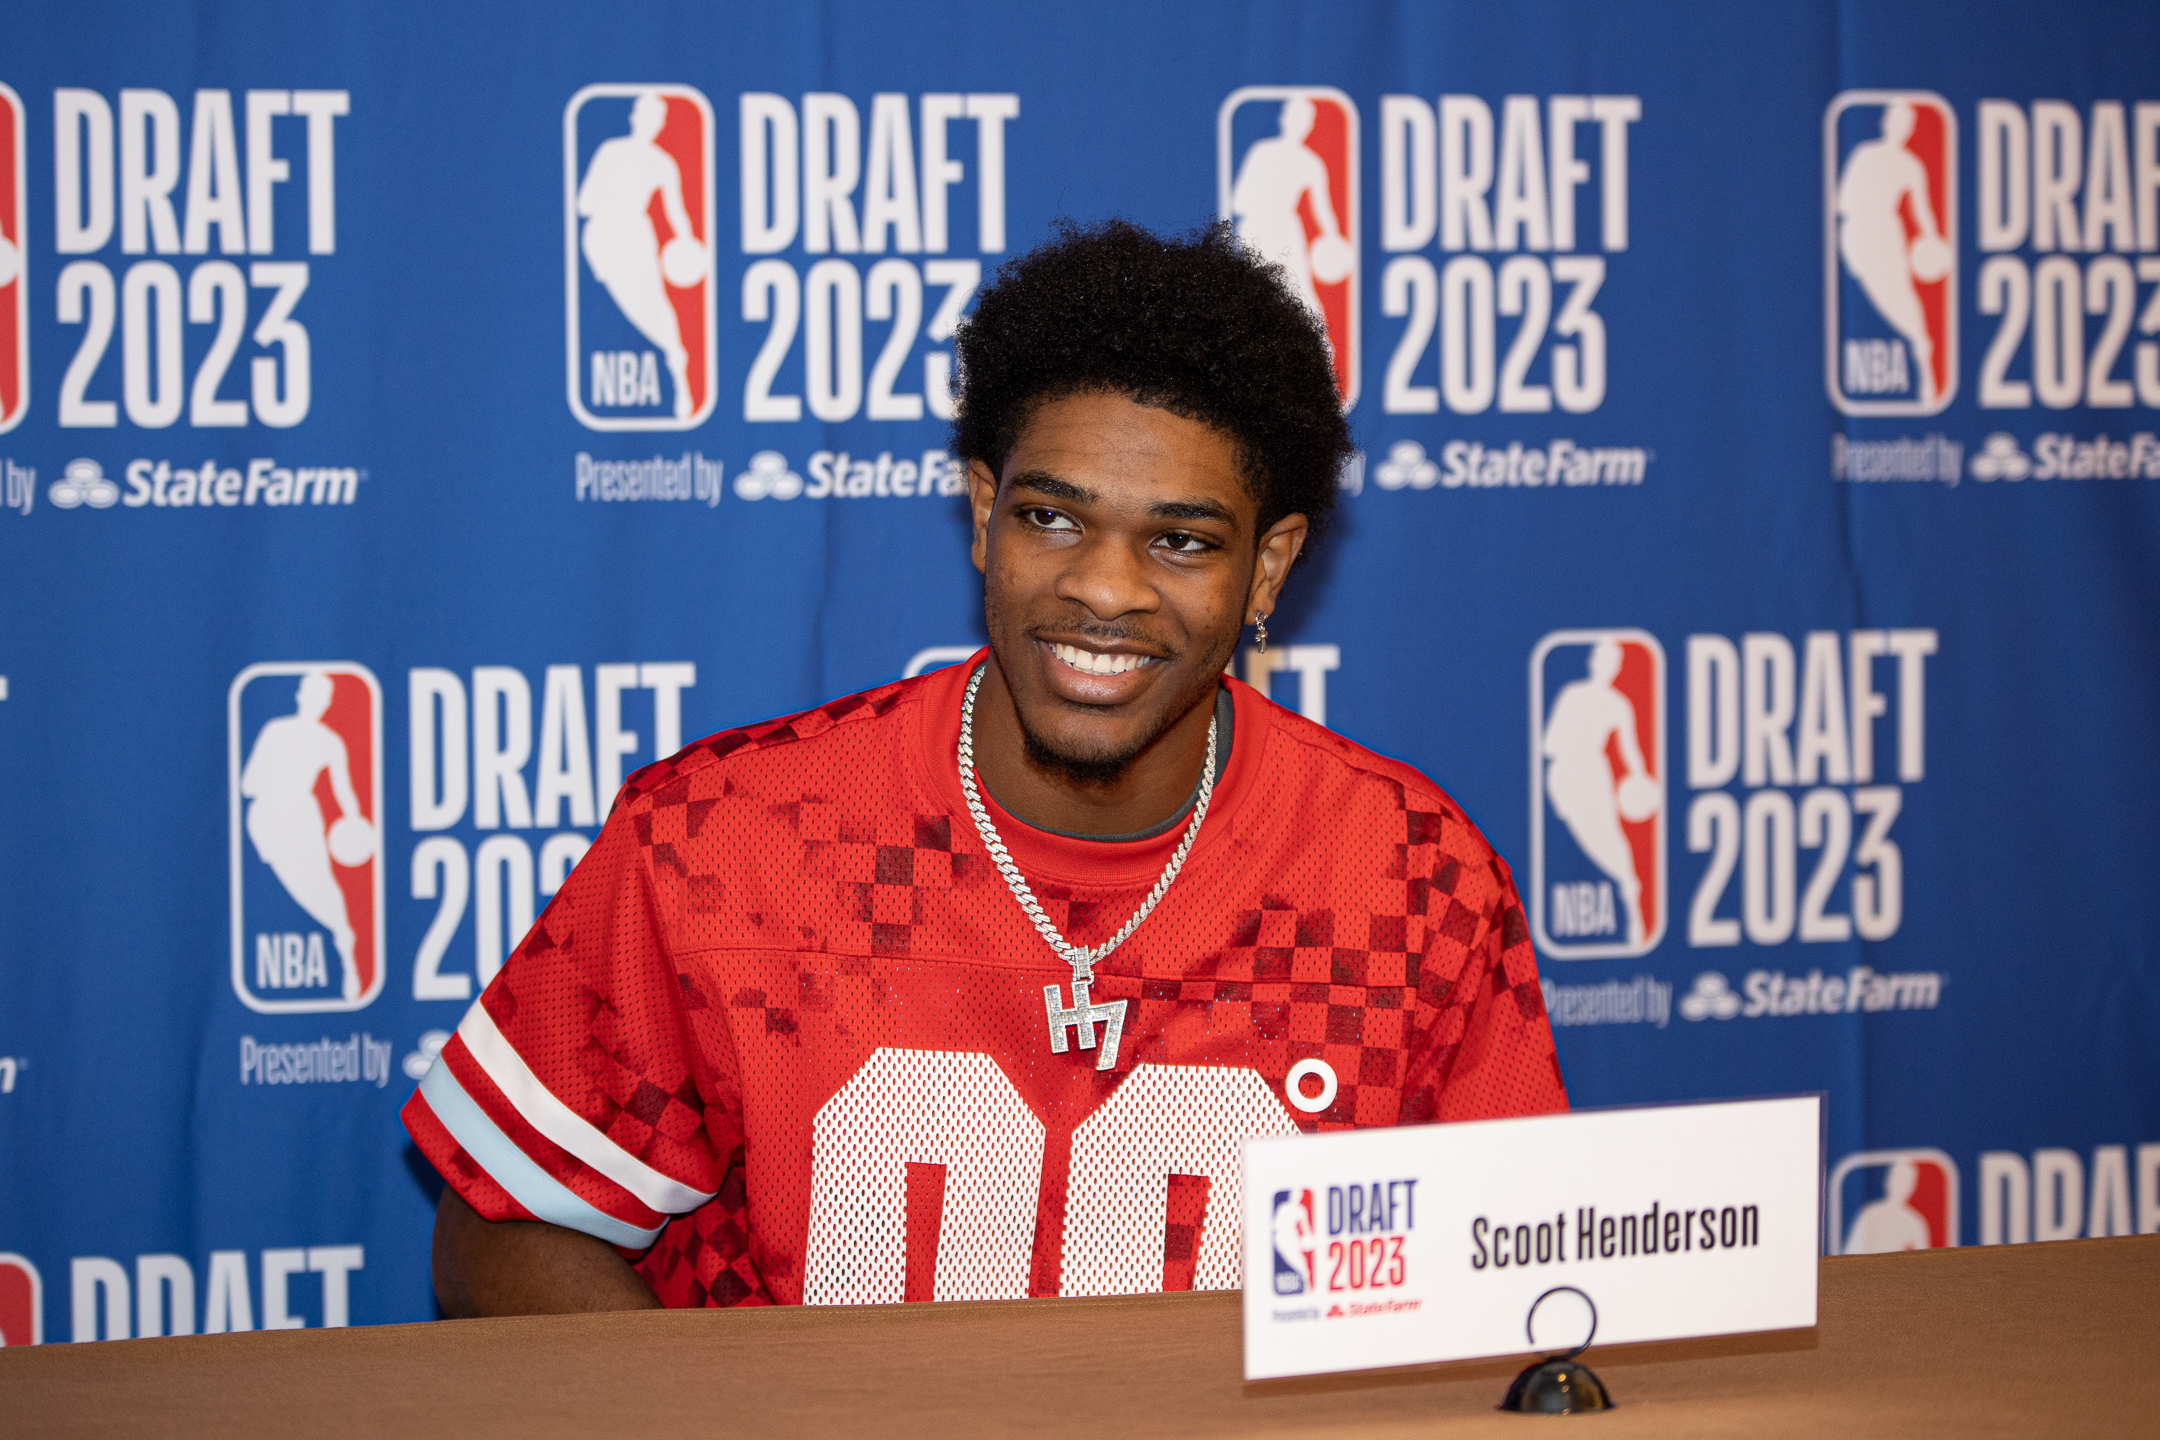 2023 NBA Draft Content Circuit and Portraits